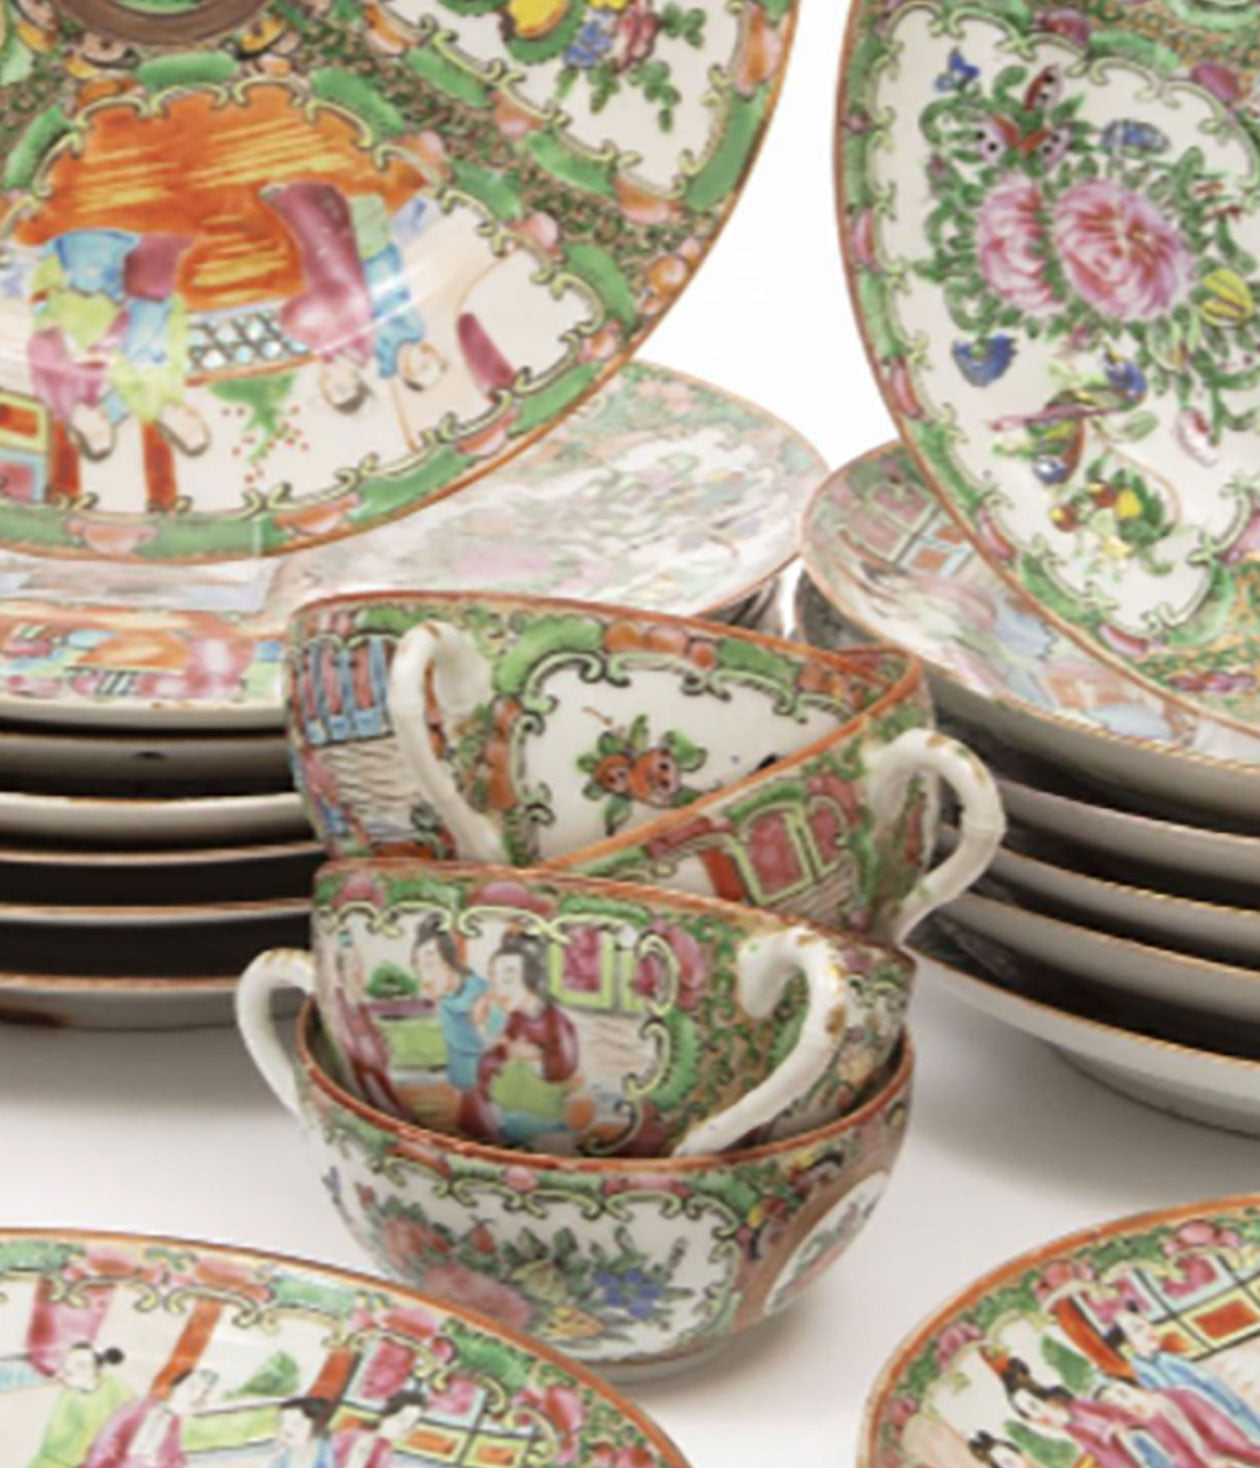 Porcelain: From China to Europe